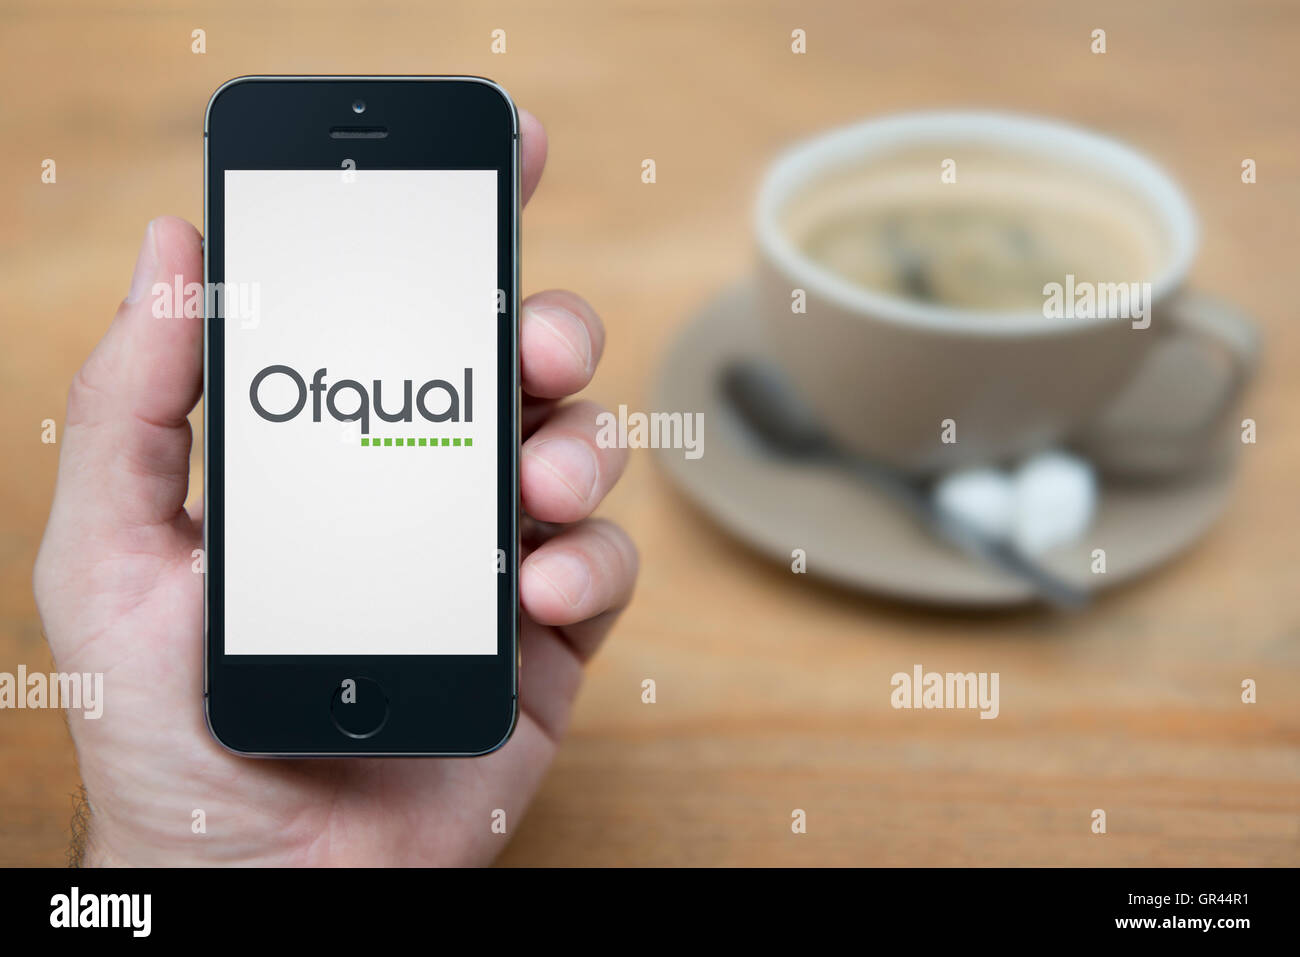 A man looks at his iPhone which displays the UK Government Ofqual logo (Editorial use only). Stock Photo